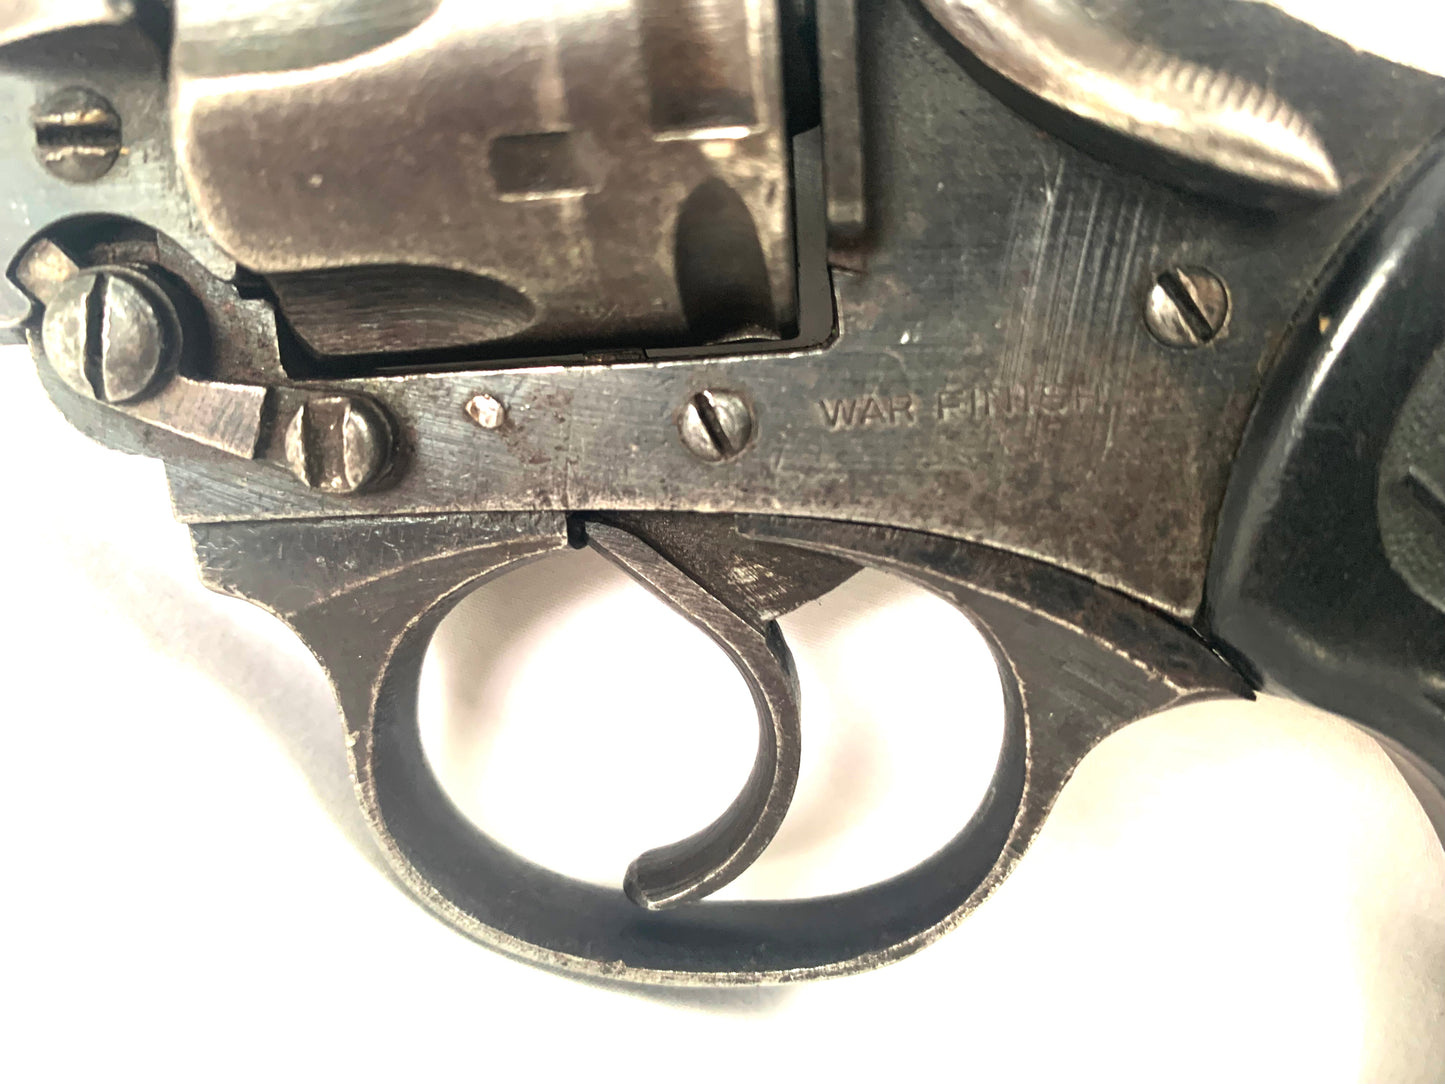 Deactivated WW2 Webley MkIV .38 Revolver ‘War Finish’ matching serial numbers